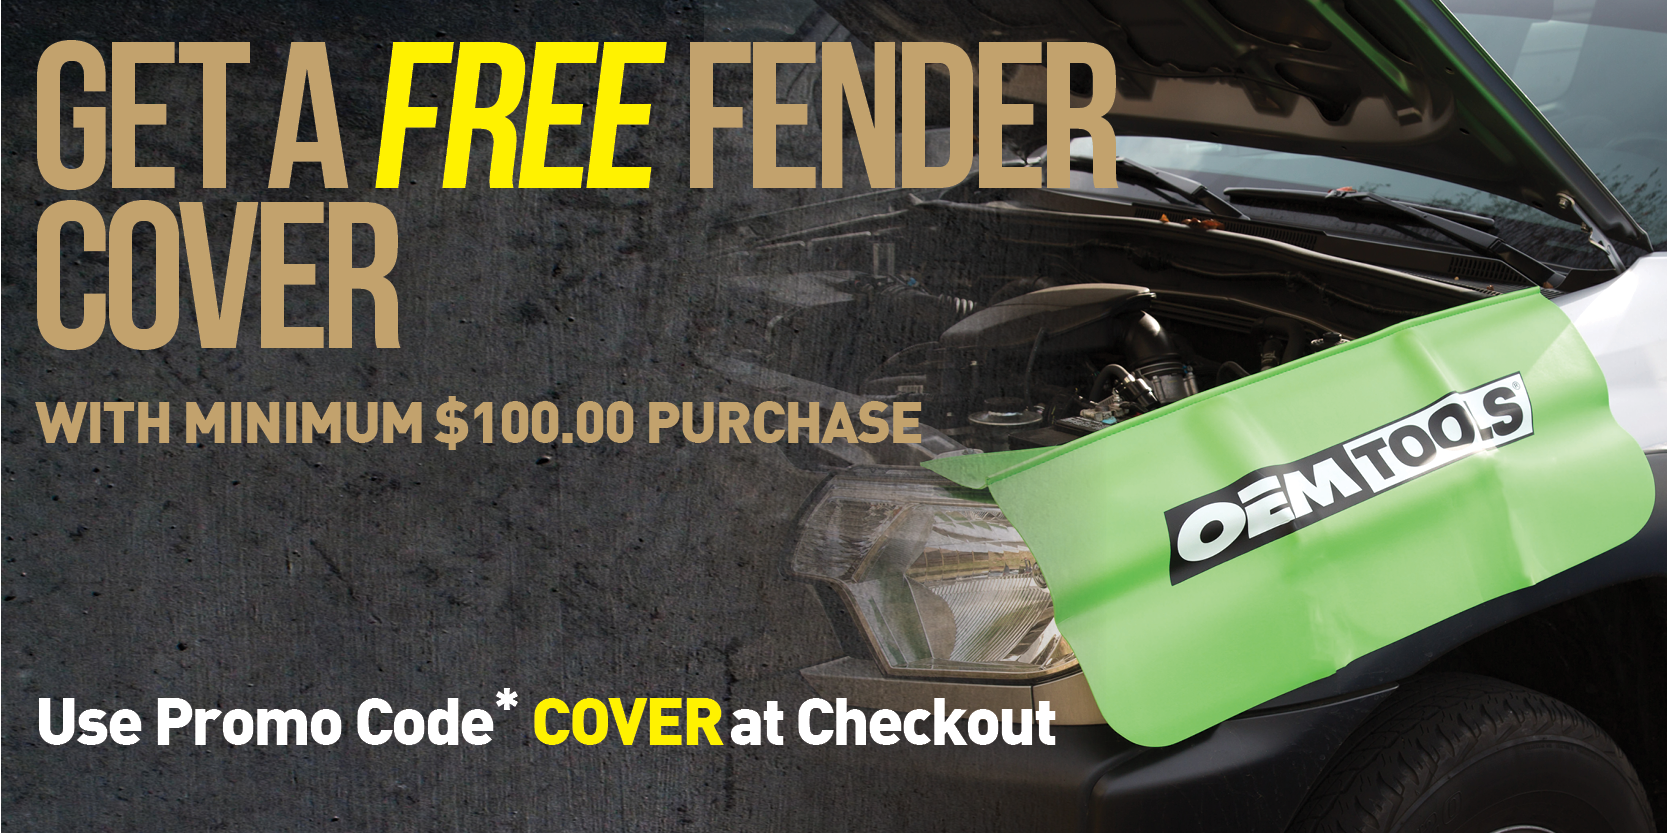 FREE Fender Cover With Minimum $100 Purchase Promo Code COVER